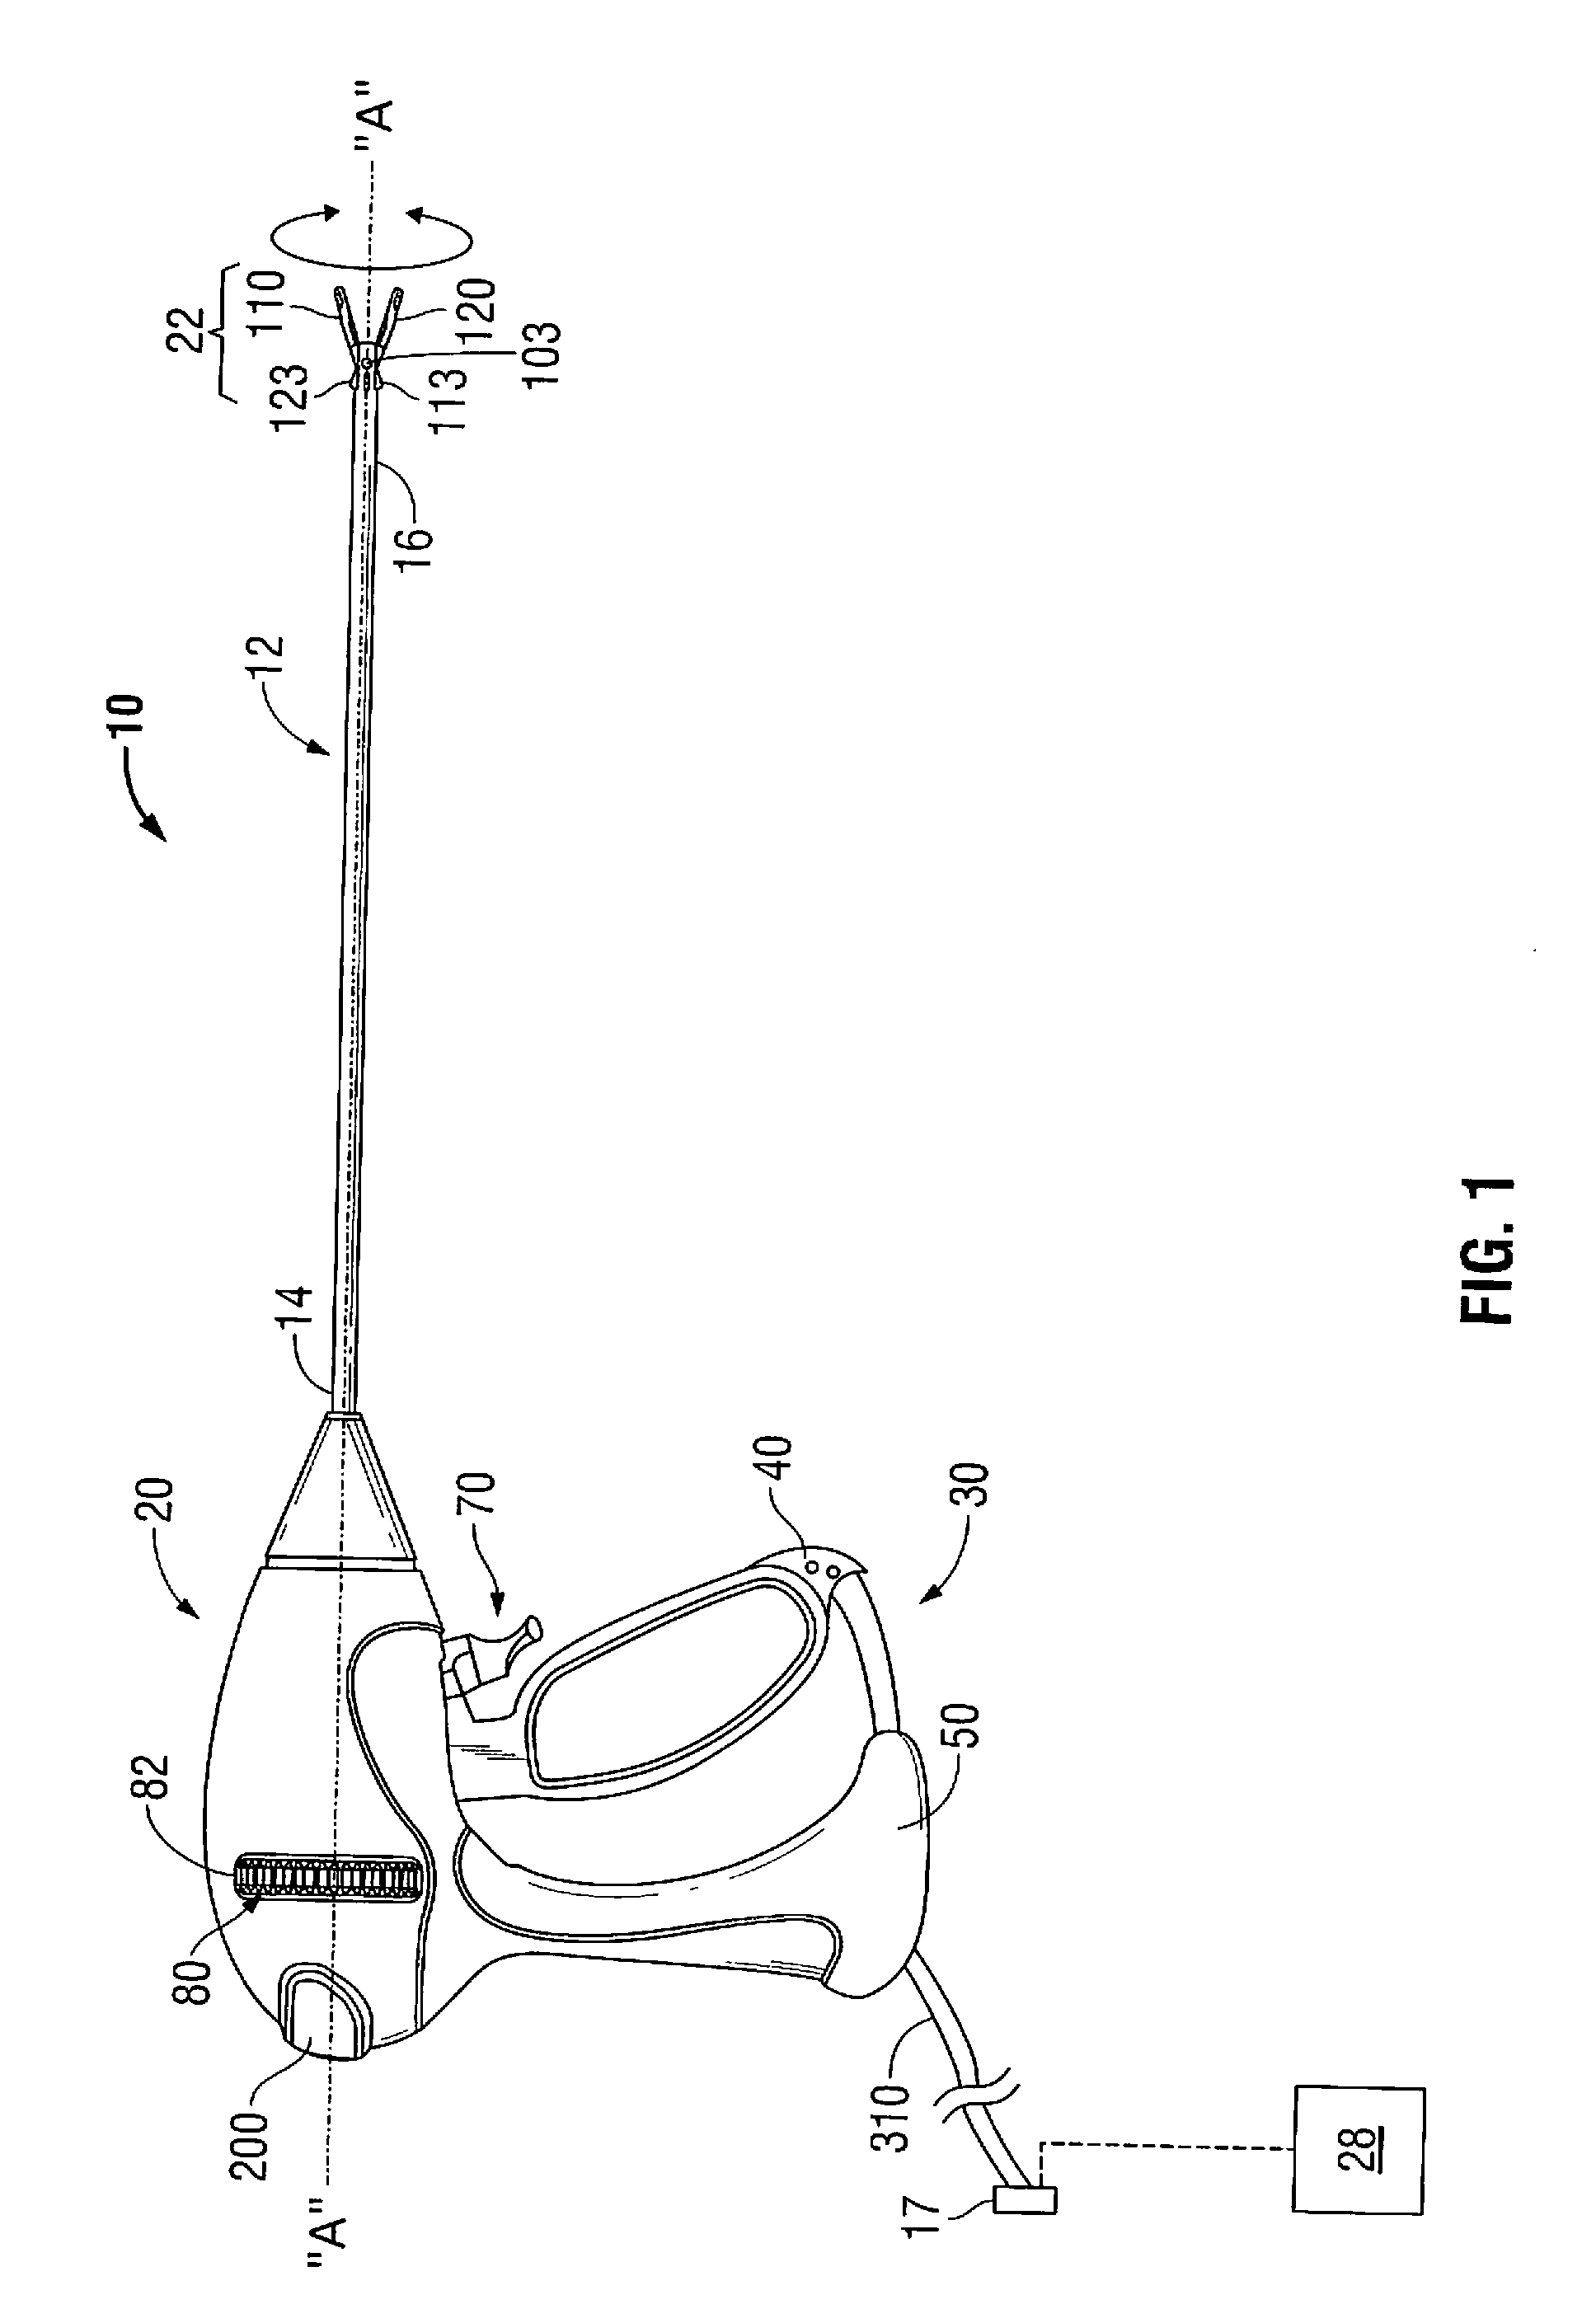 End-Effector Assemblies for Electrosurgical Instruments and Methods of Manufacturing Jaw Assembly Components of End-Effector Assemblies